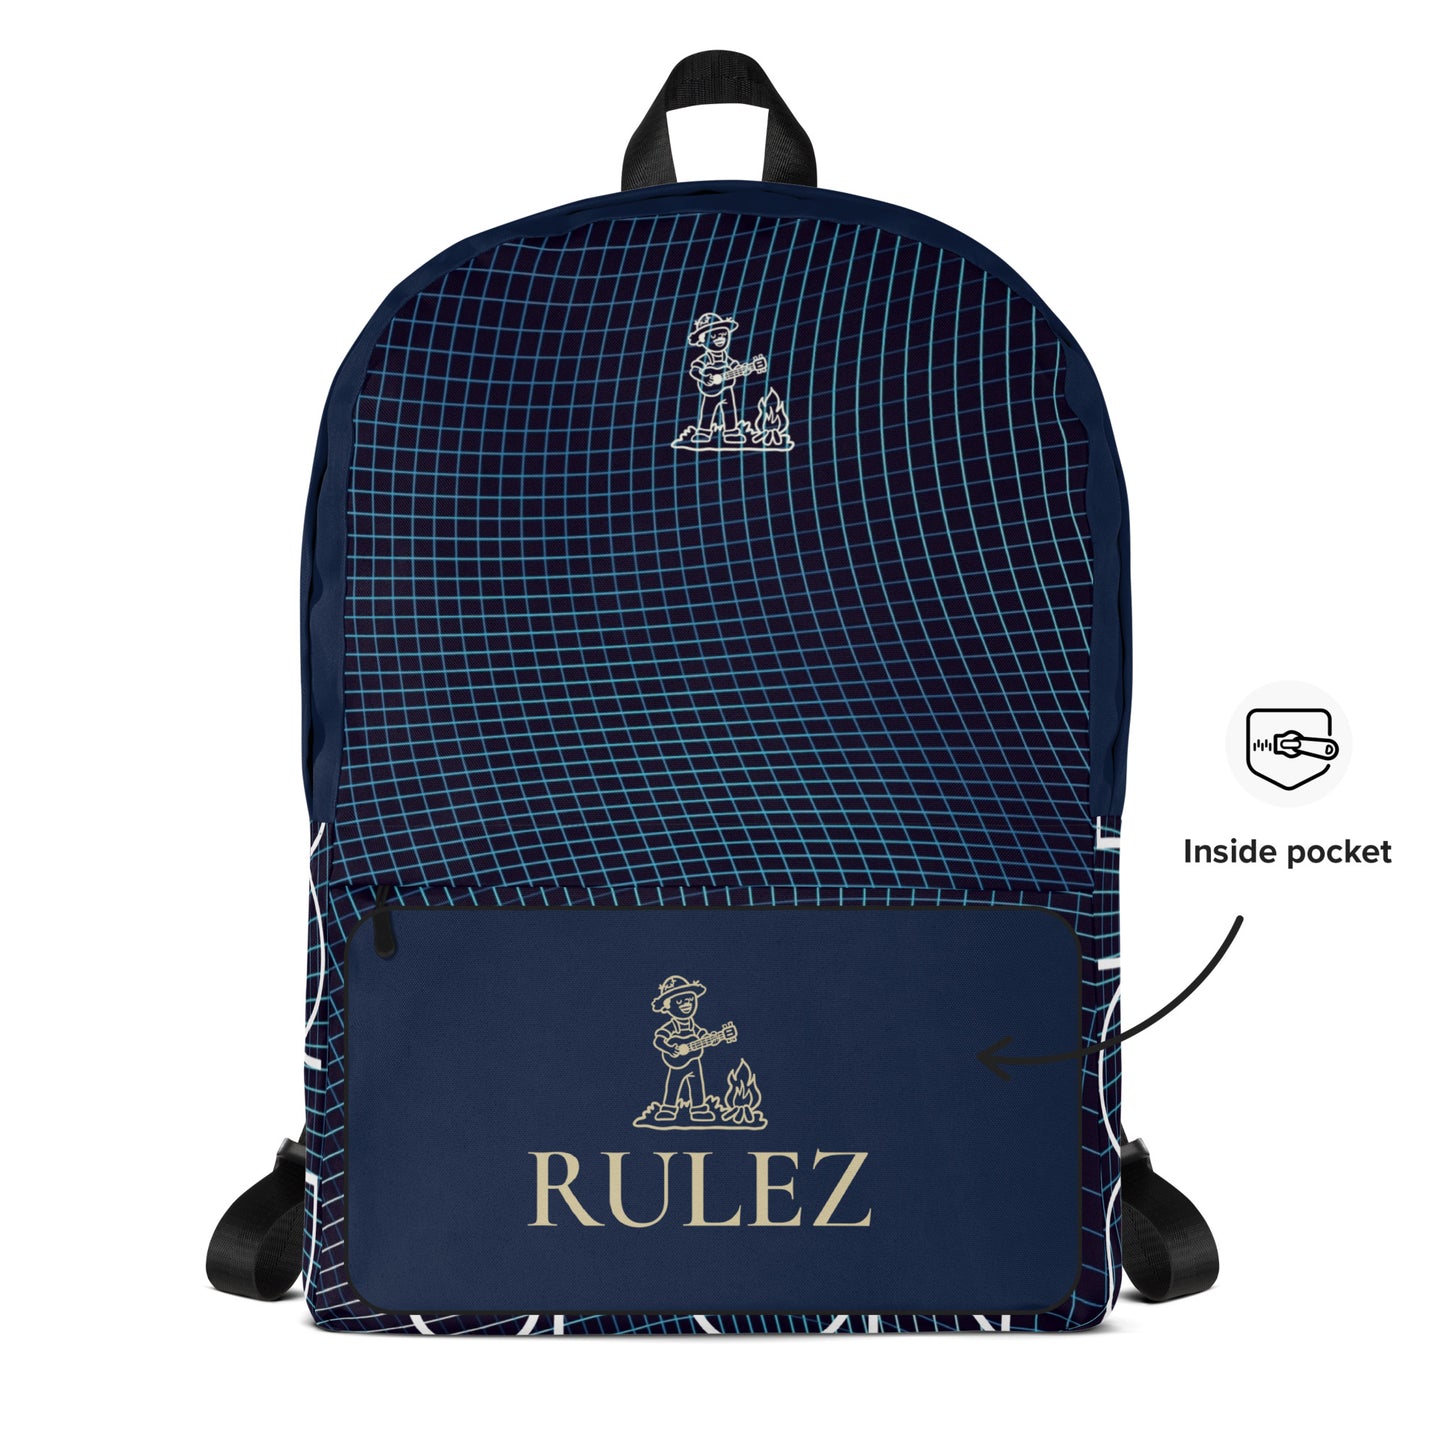 RULEZ Backpack "Standing On Business"